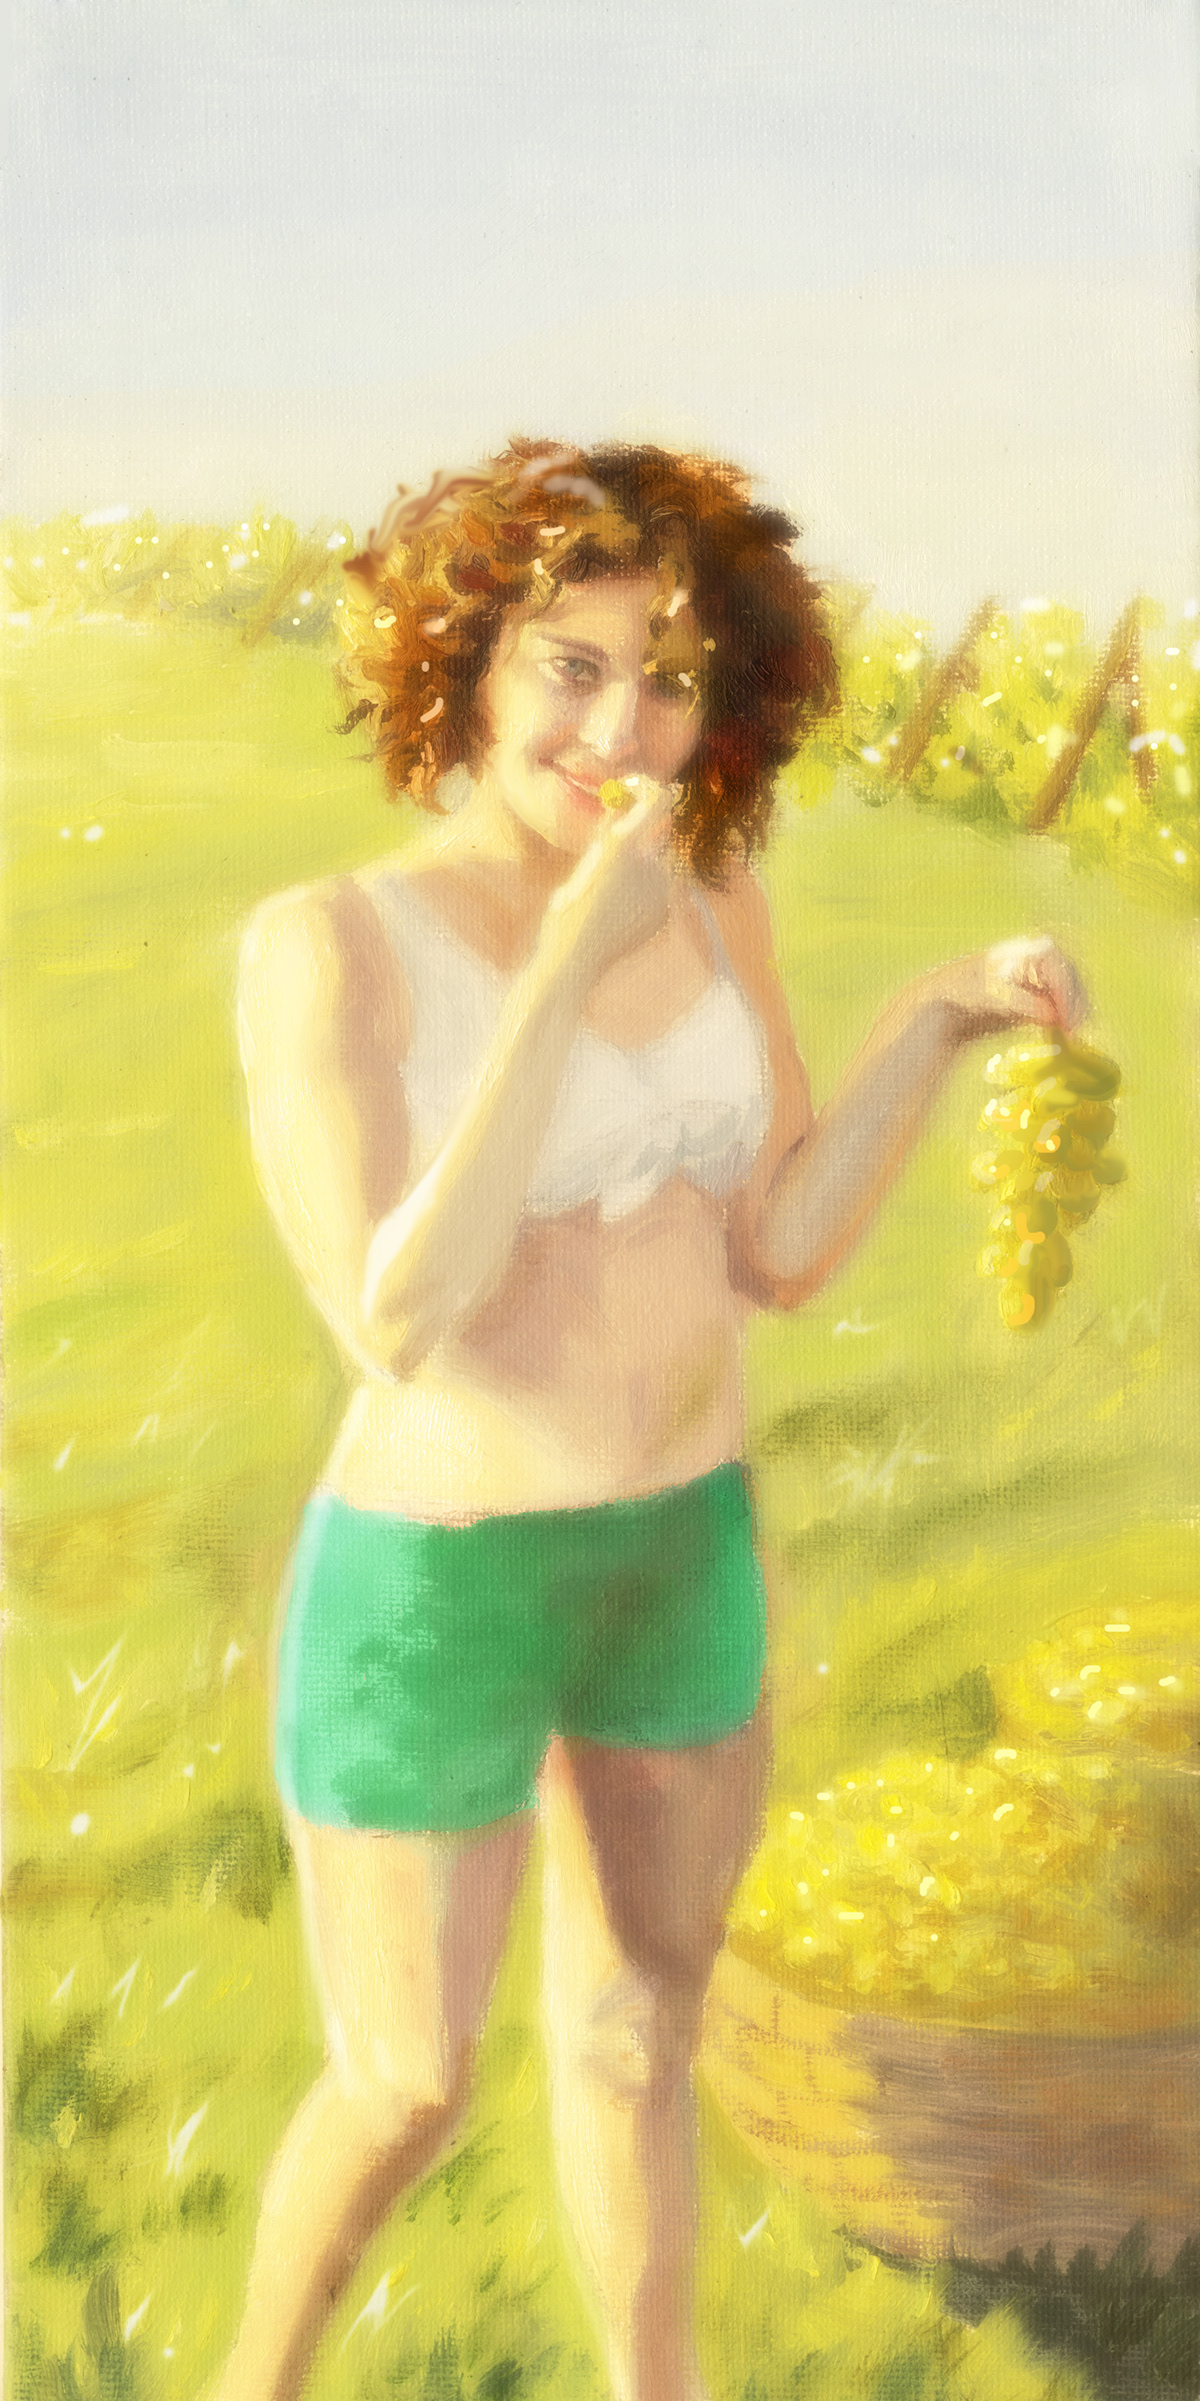 wine girl grapes light Sun Italy Label Chardonnay Merlot White red yellow old  WOMAN sexy